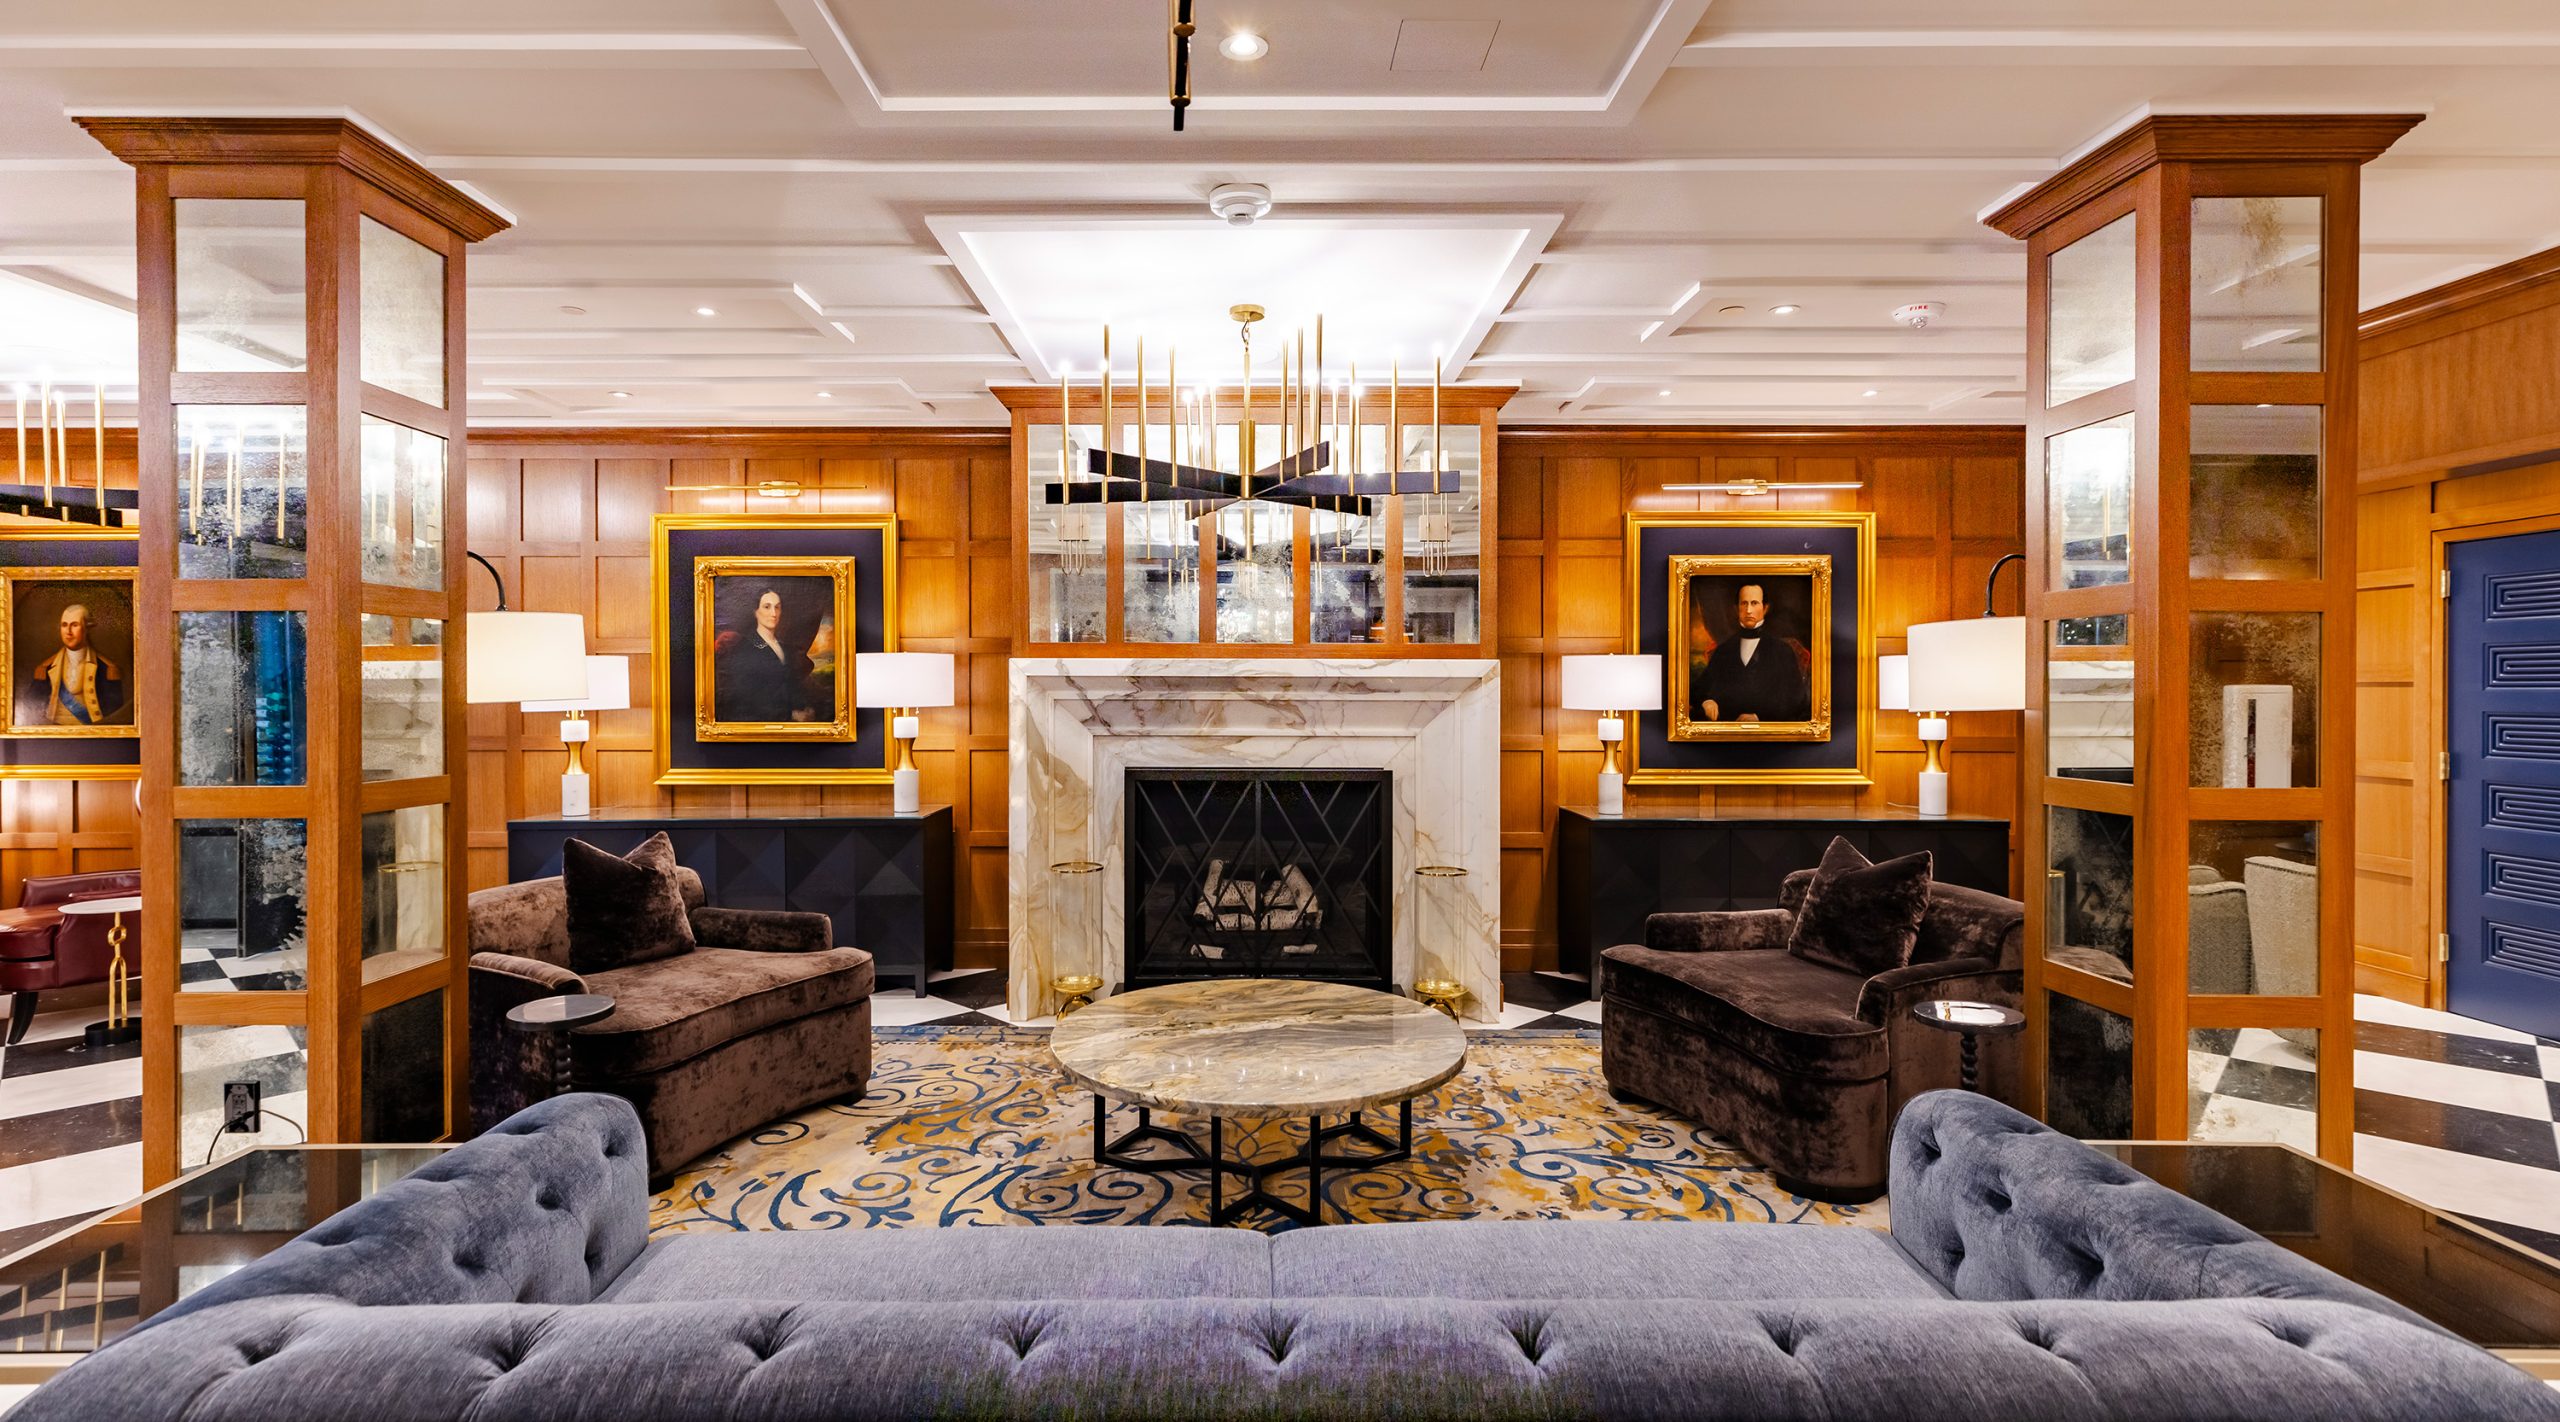 Lobby area outside the Fawn & Fable restaurant at The Grand Lodge at Nemacolin, showing a fireplace and comfortable furniture